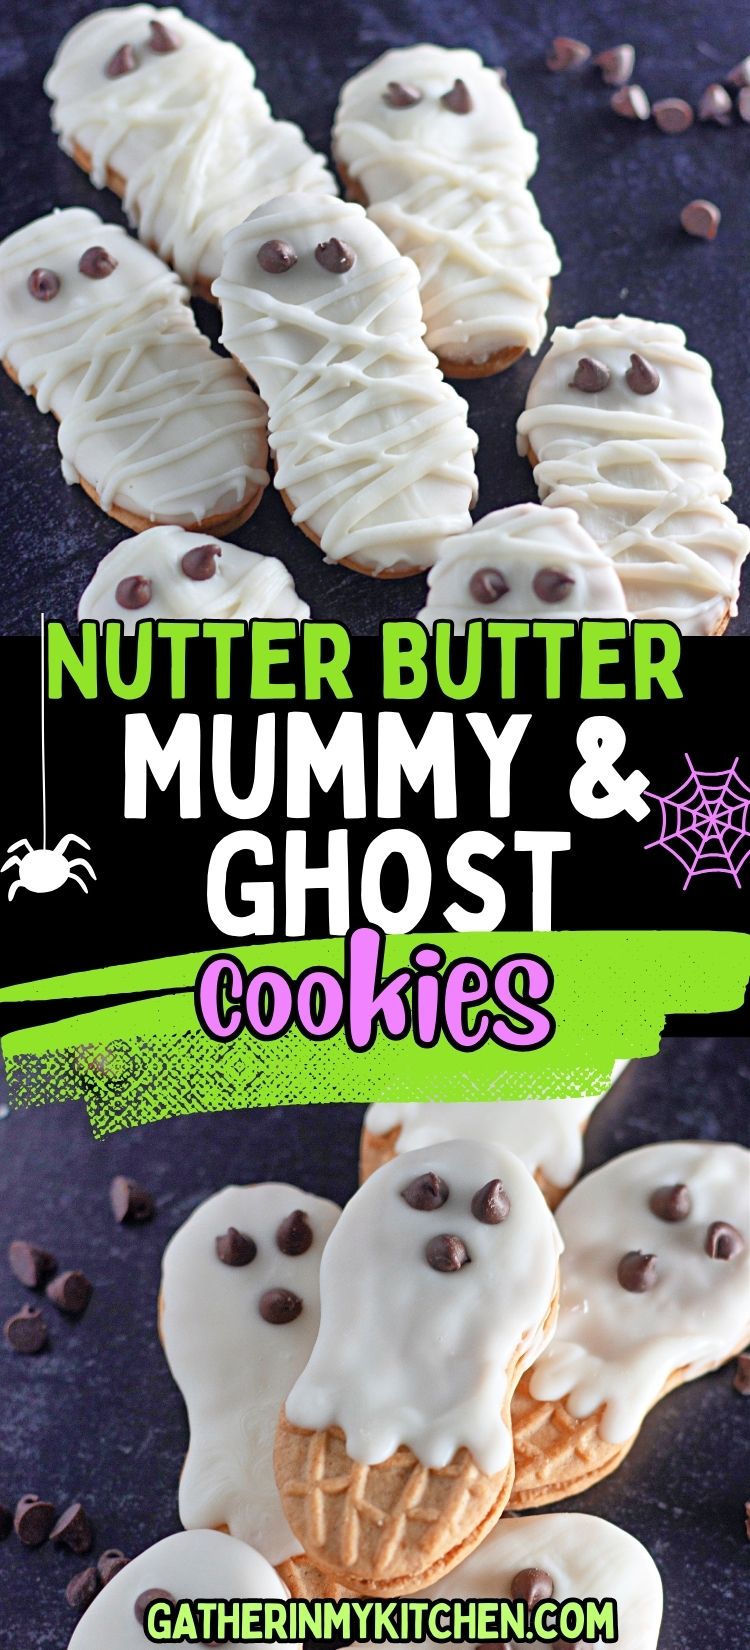 Pin image: top is a pieces of nutter butter mummy ghost cookies laid out on a table, middle says "Nutter Butter Mummy & Ghost Cookies" and bottom is a closeup of ghost cookies.